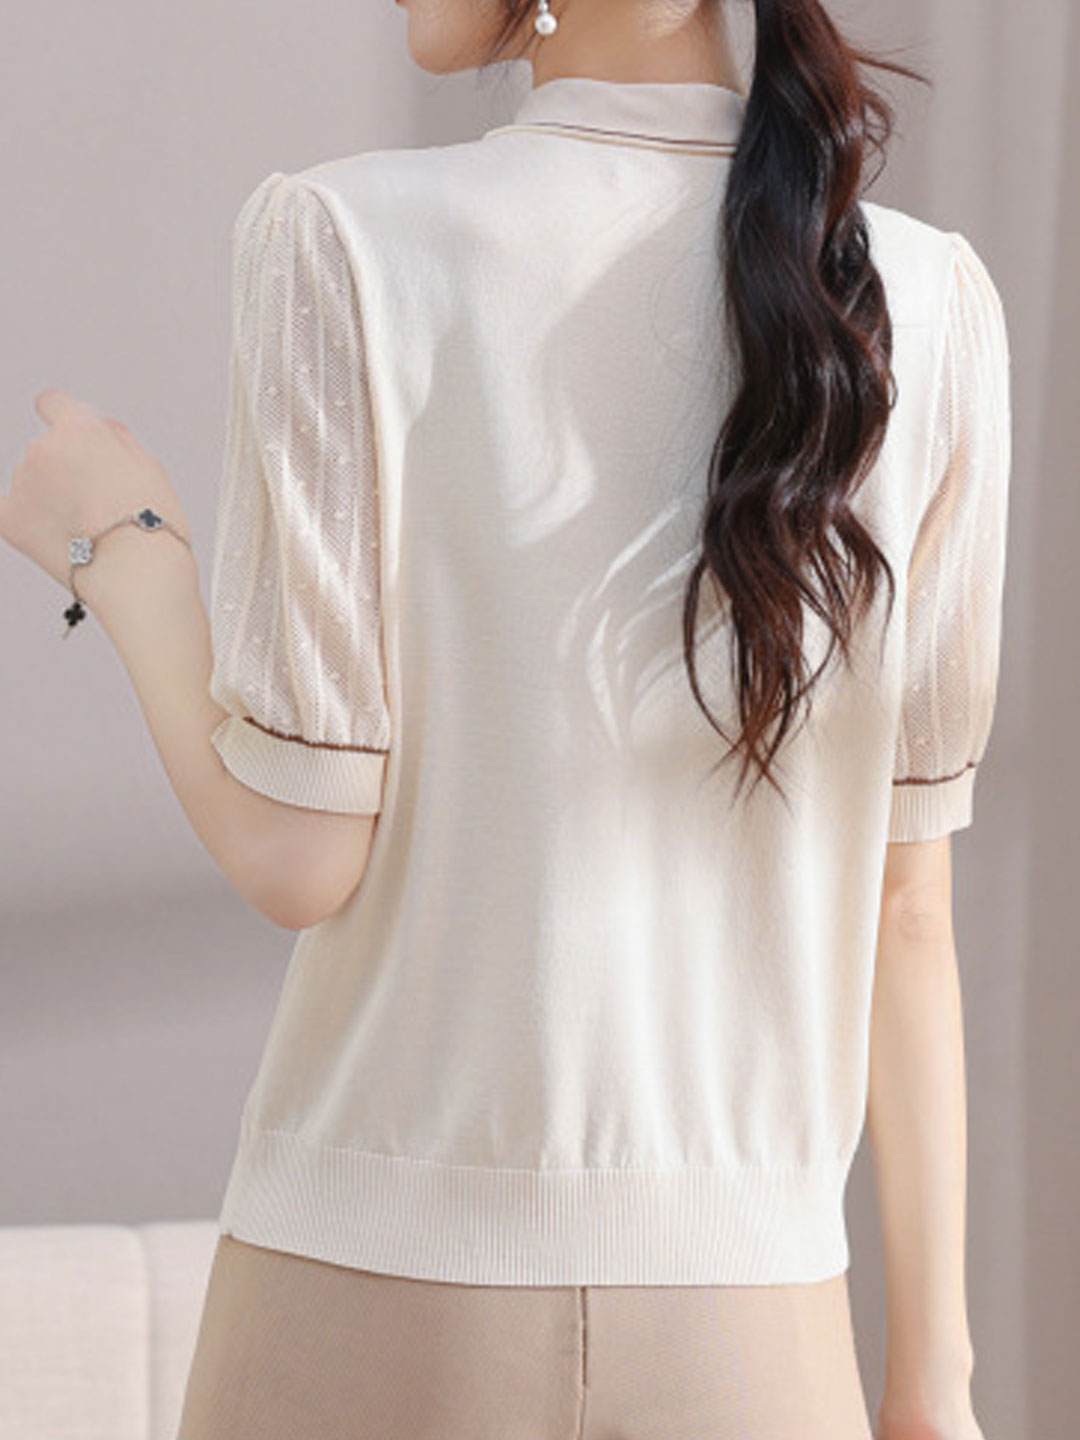 Ava Classic V-Neck Bow Ice Silk Knitted Top